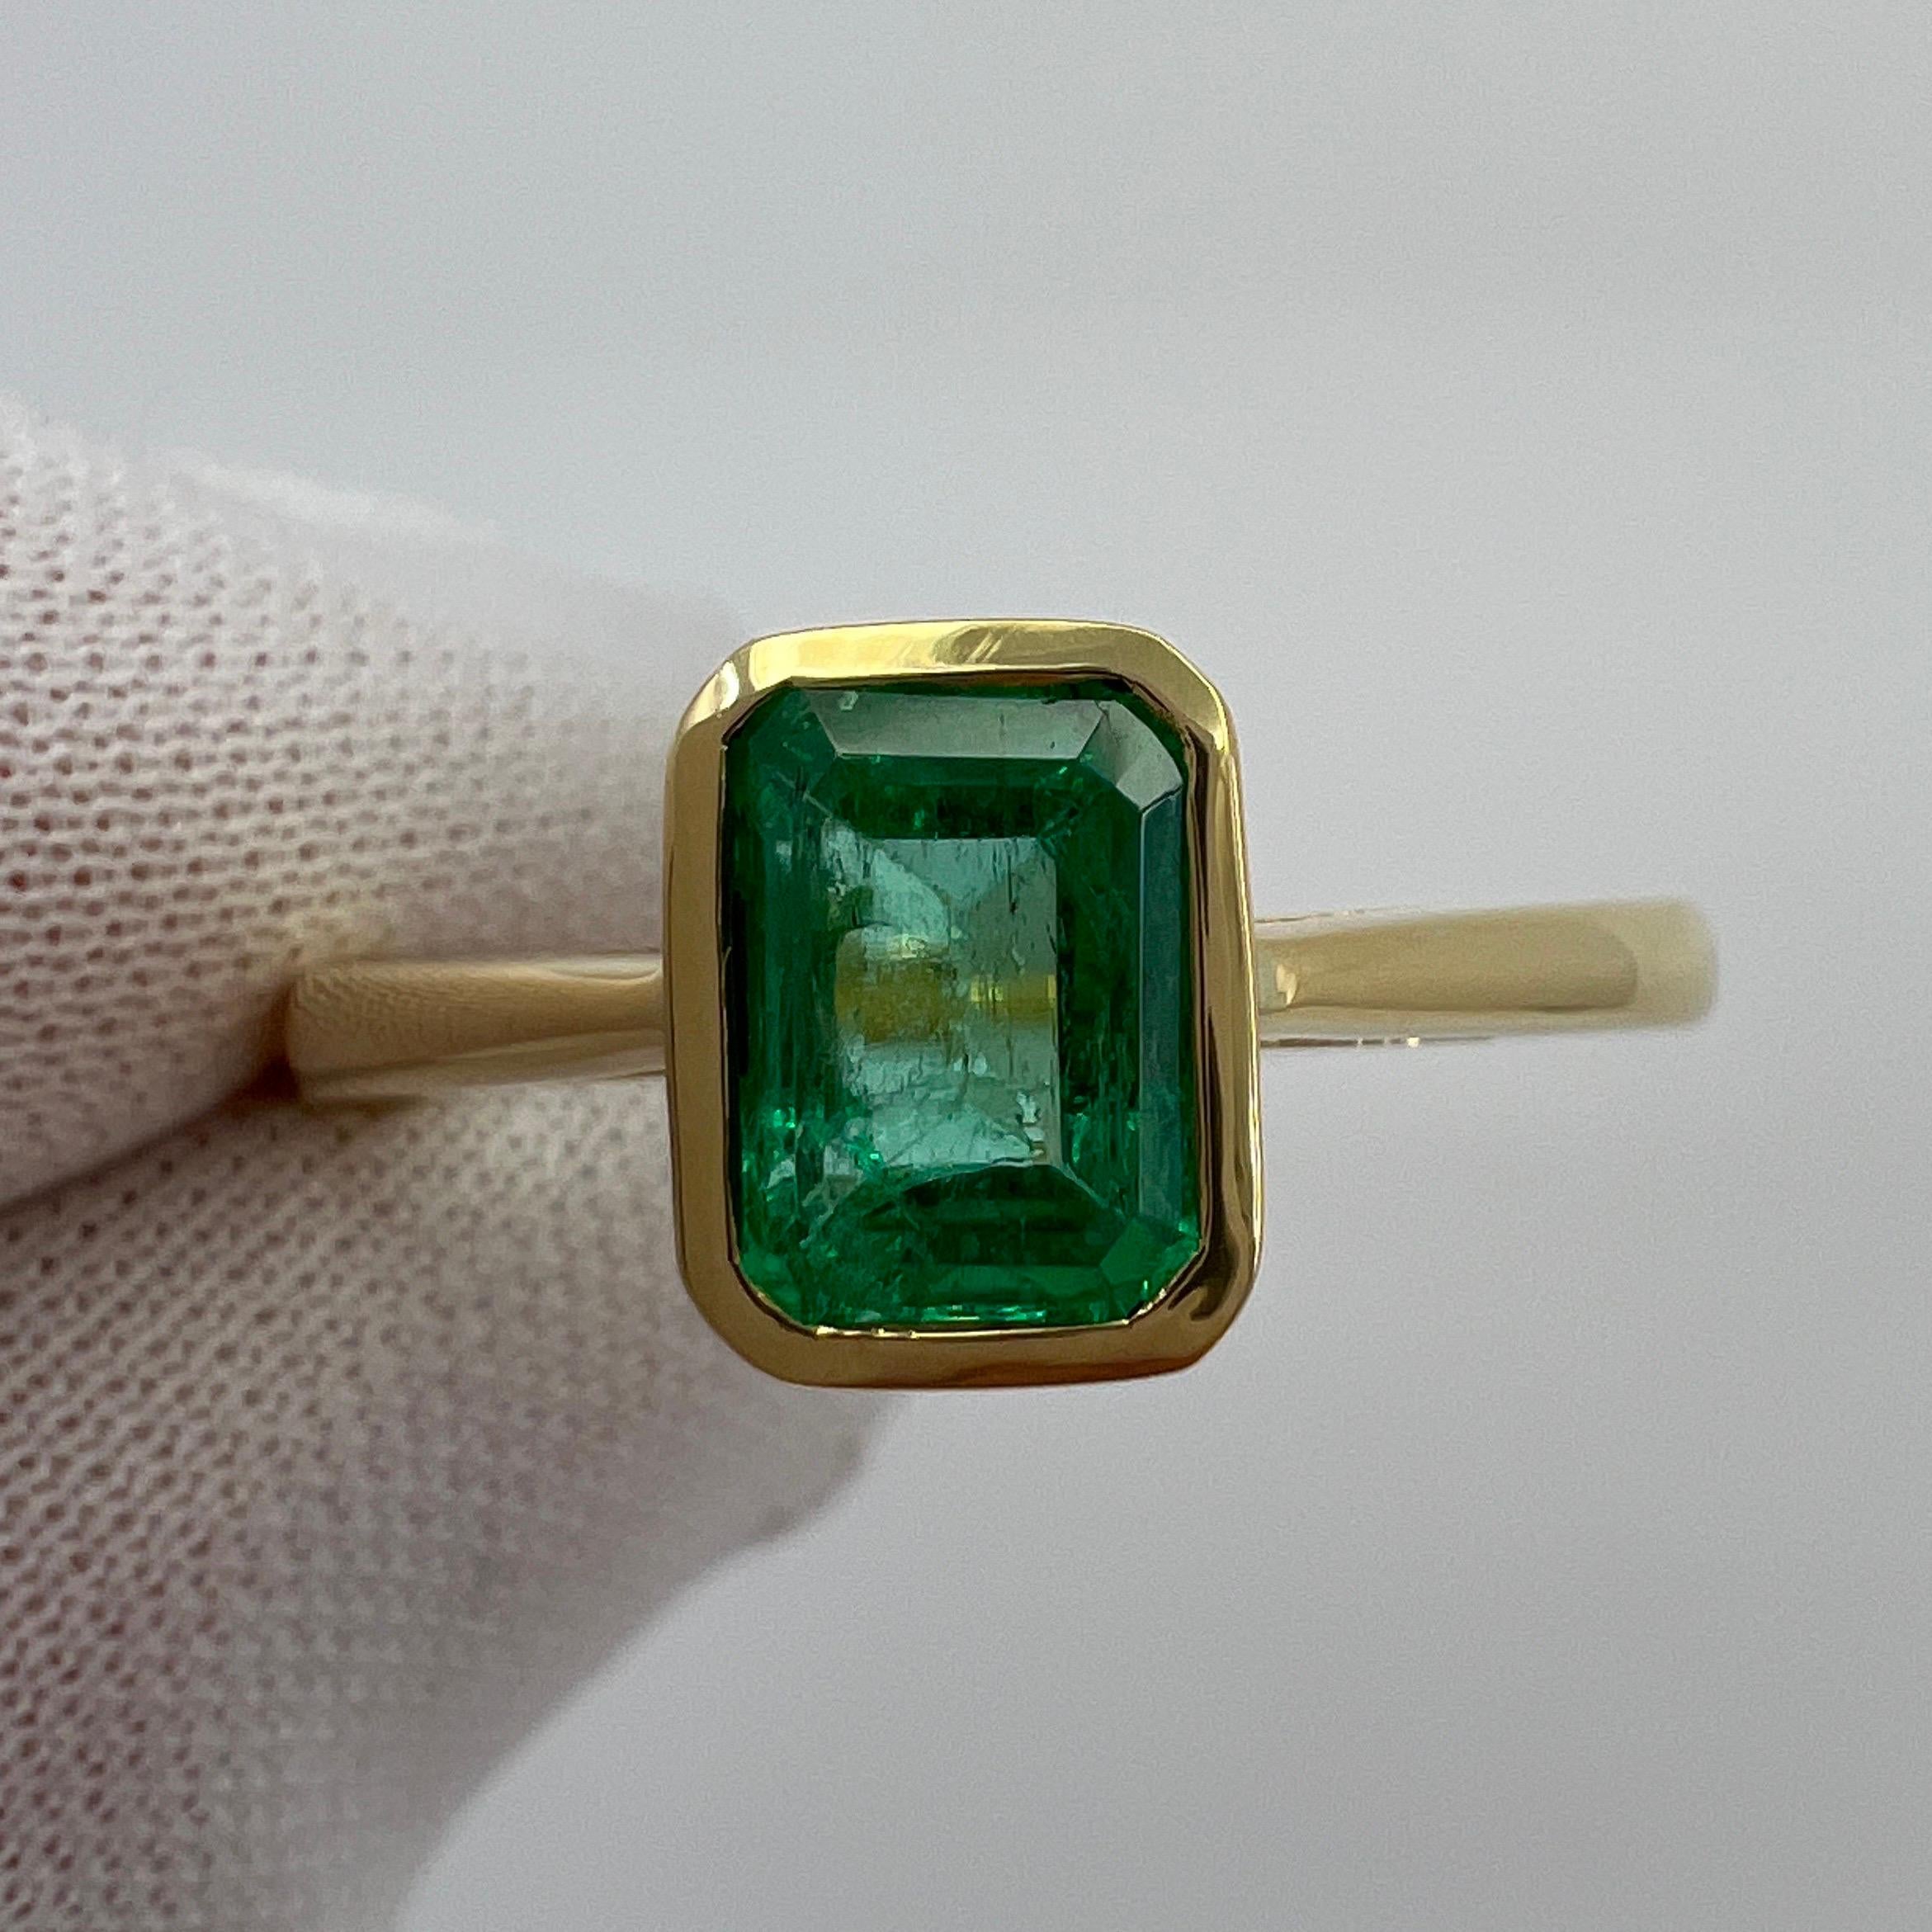 Emerald Cut GIA Certified Vivid Green 1.5ct Colombian Emerald 18k Yellow Gold Solitaire Ring